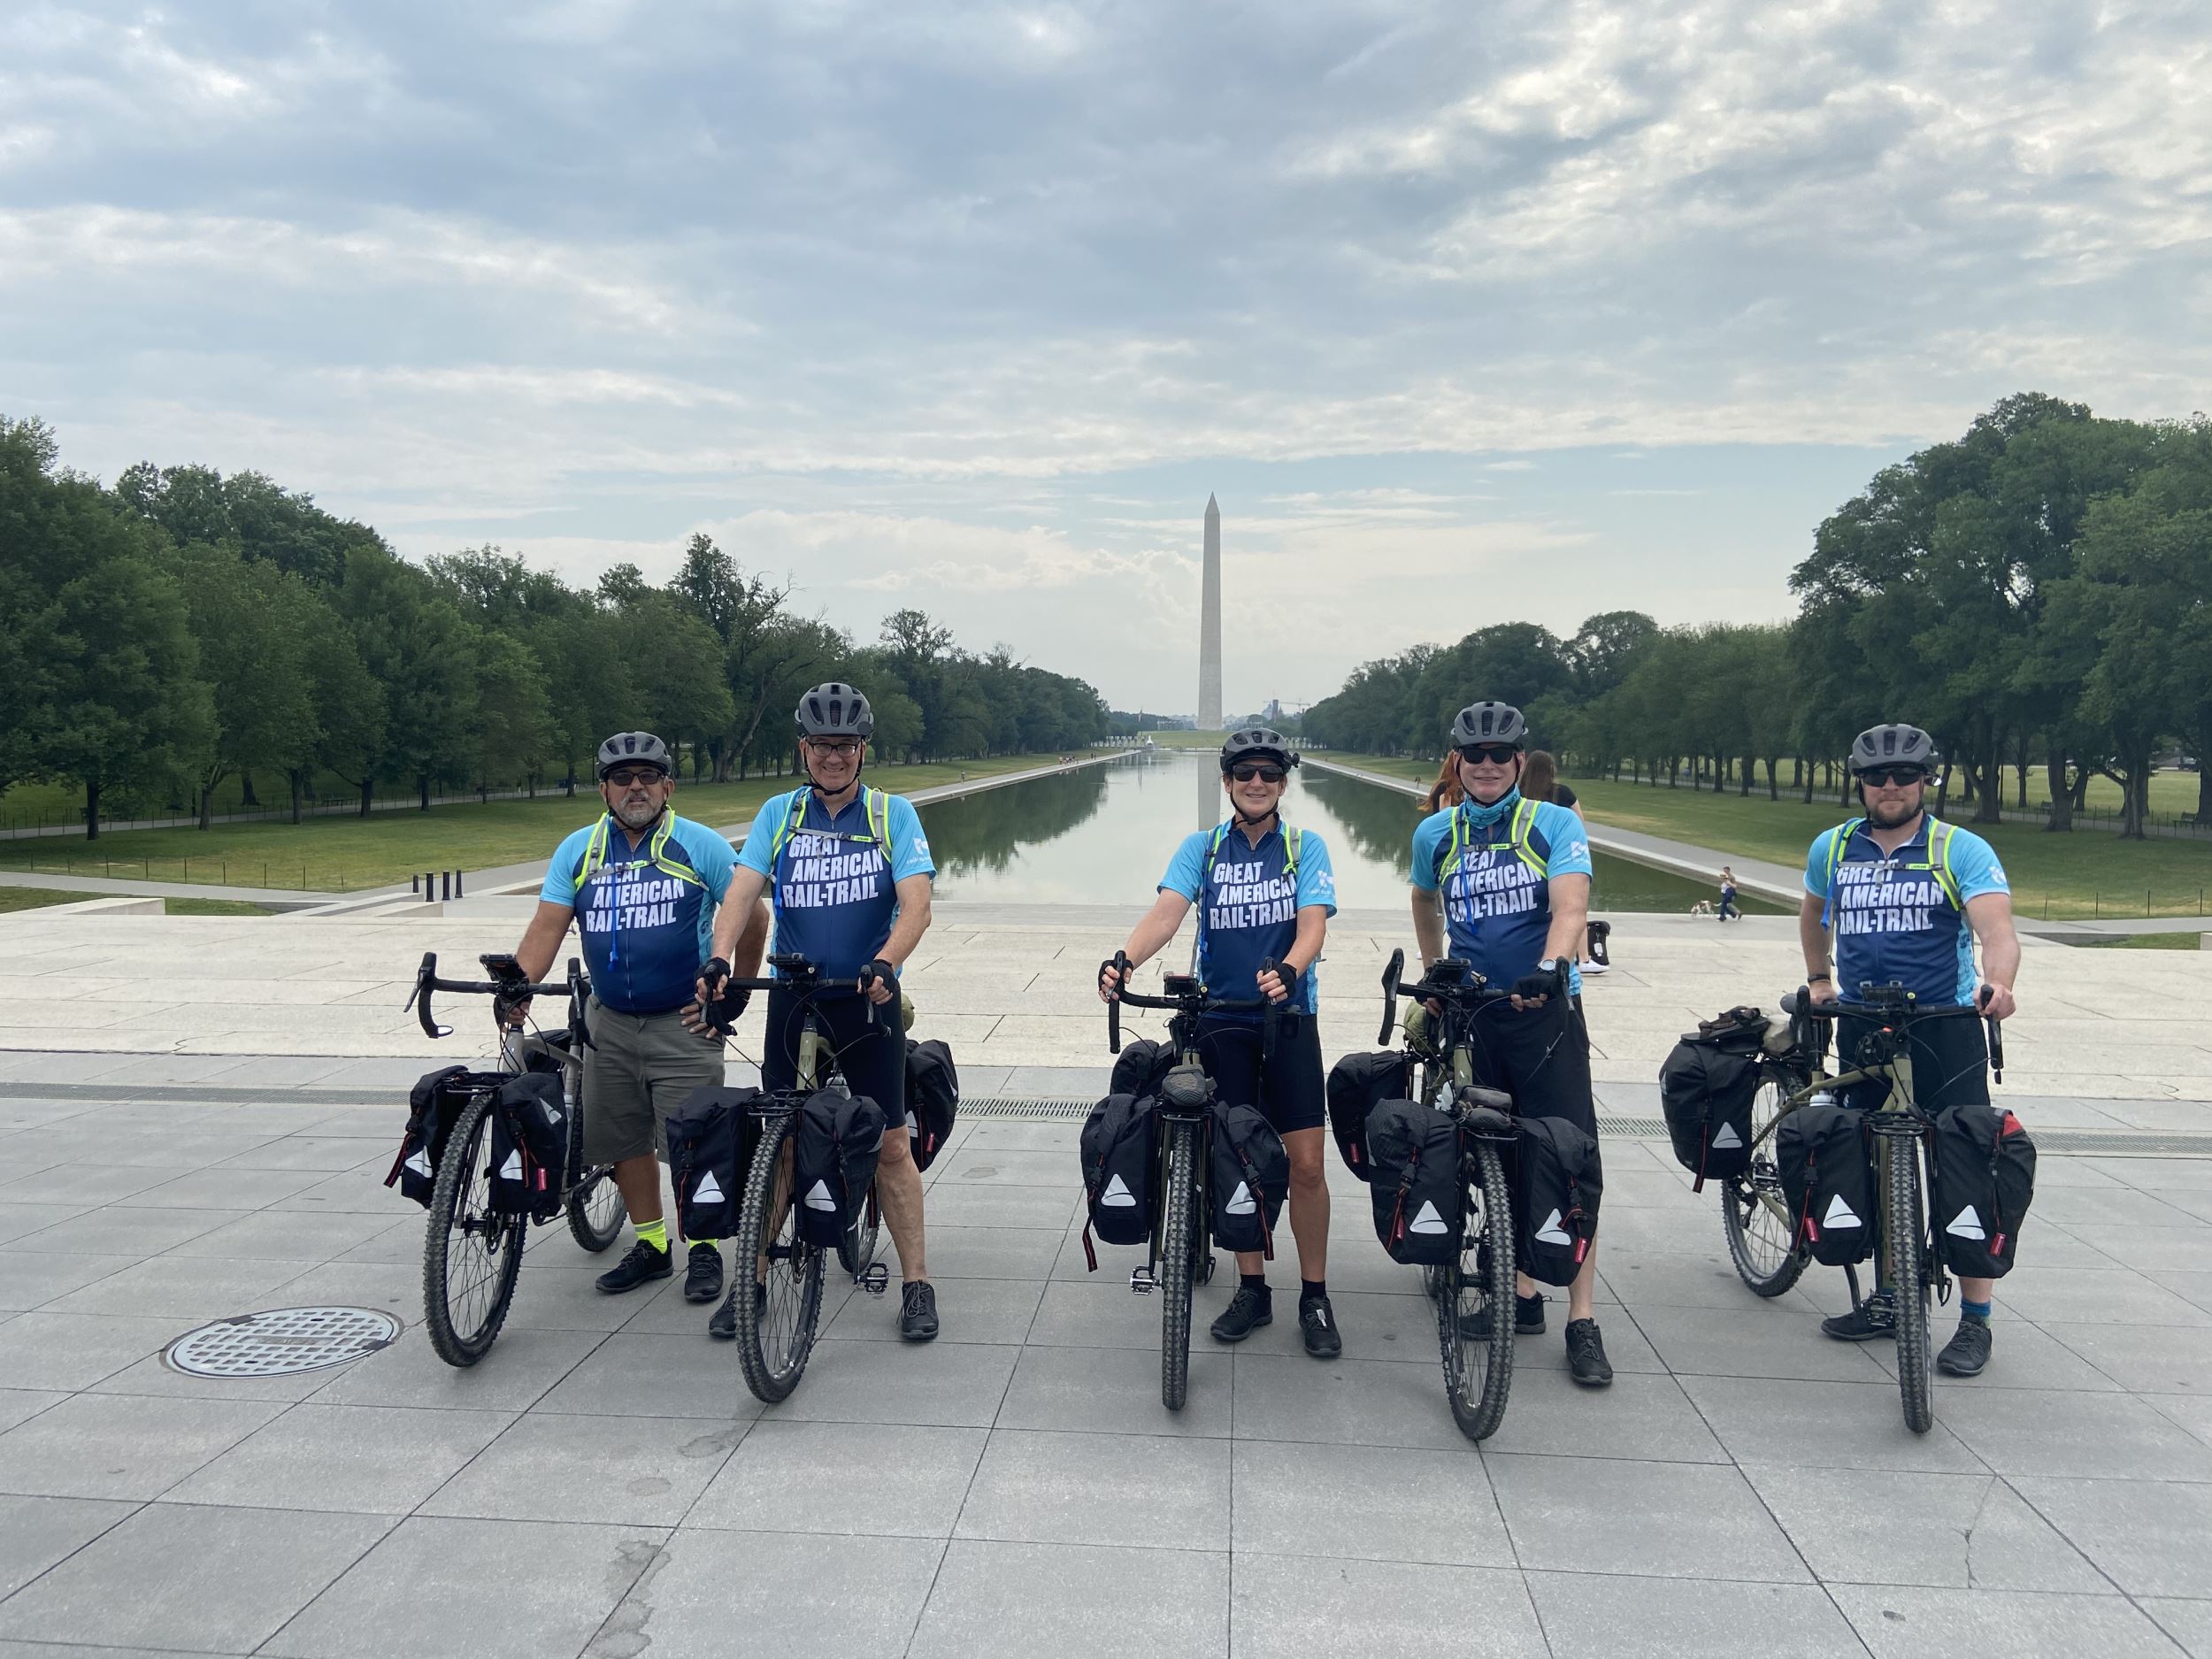 Group of cyclists in front of the Washington Monument in Washington, D.C.